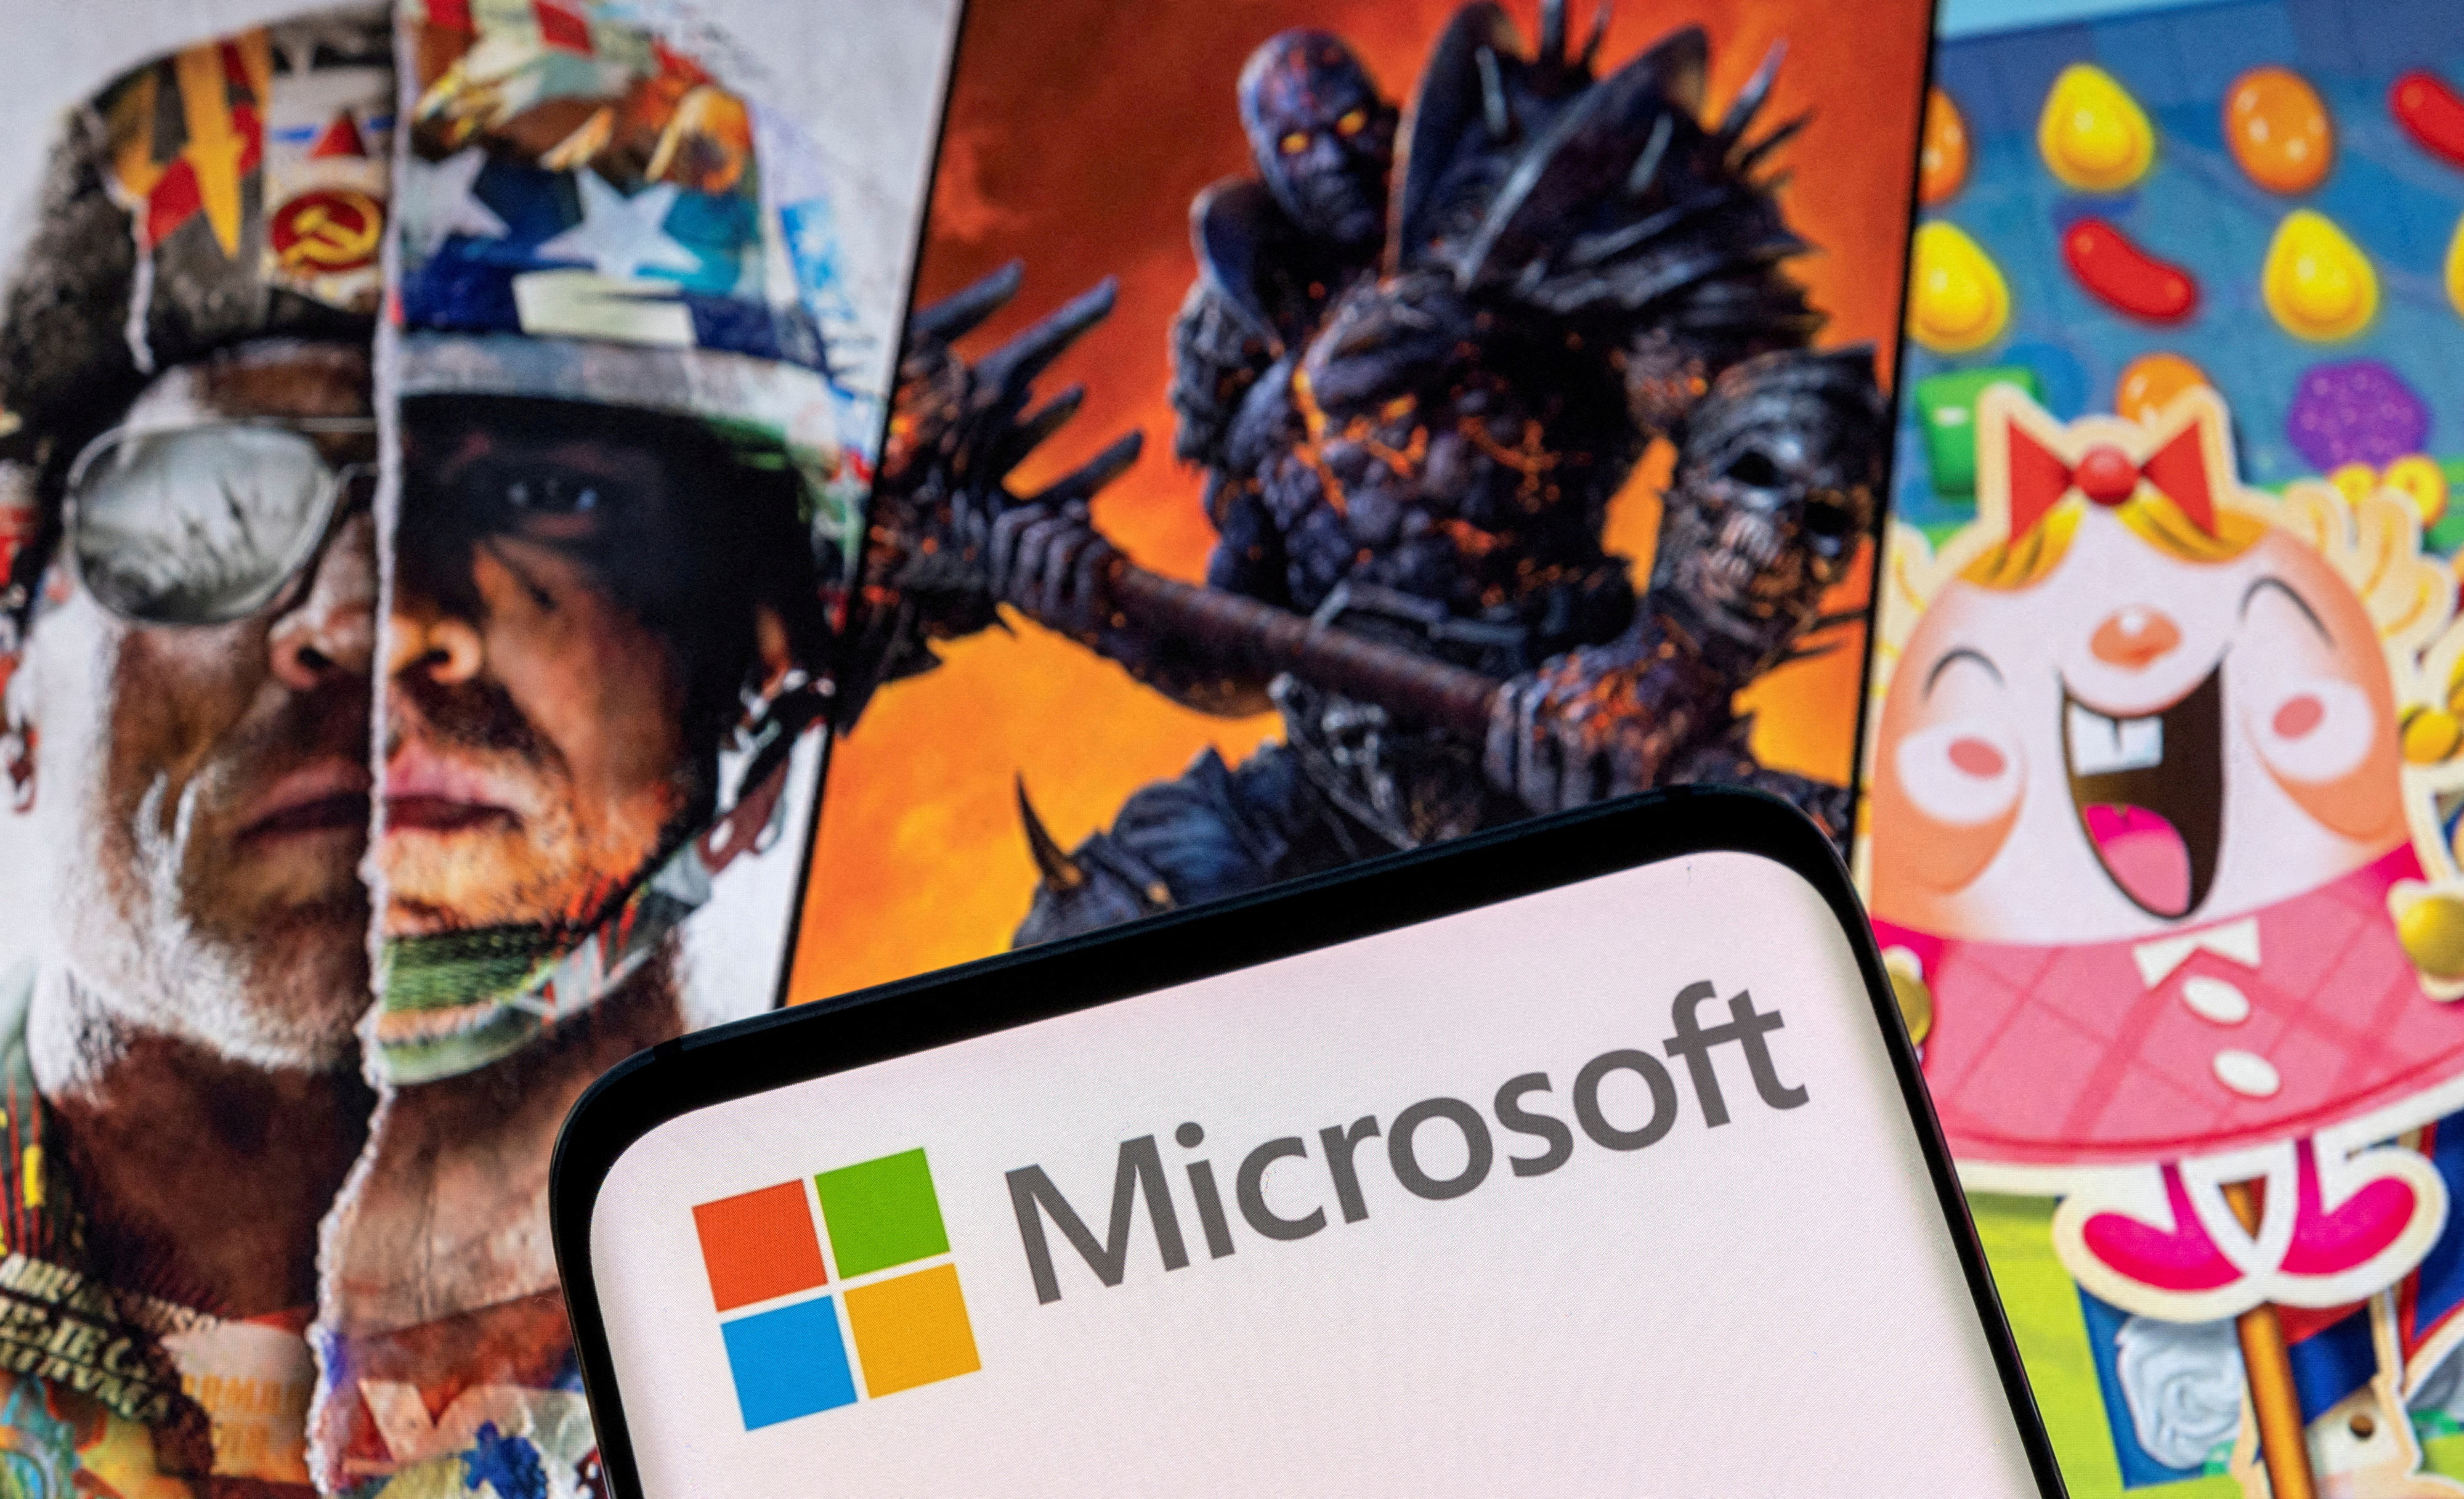 Microsoft Activision Blizzard game deal